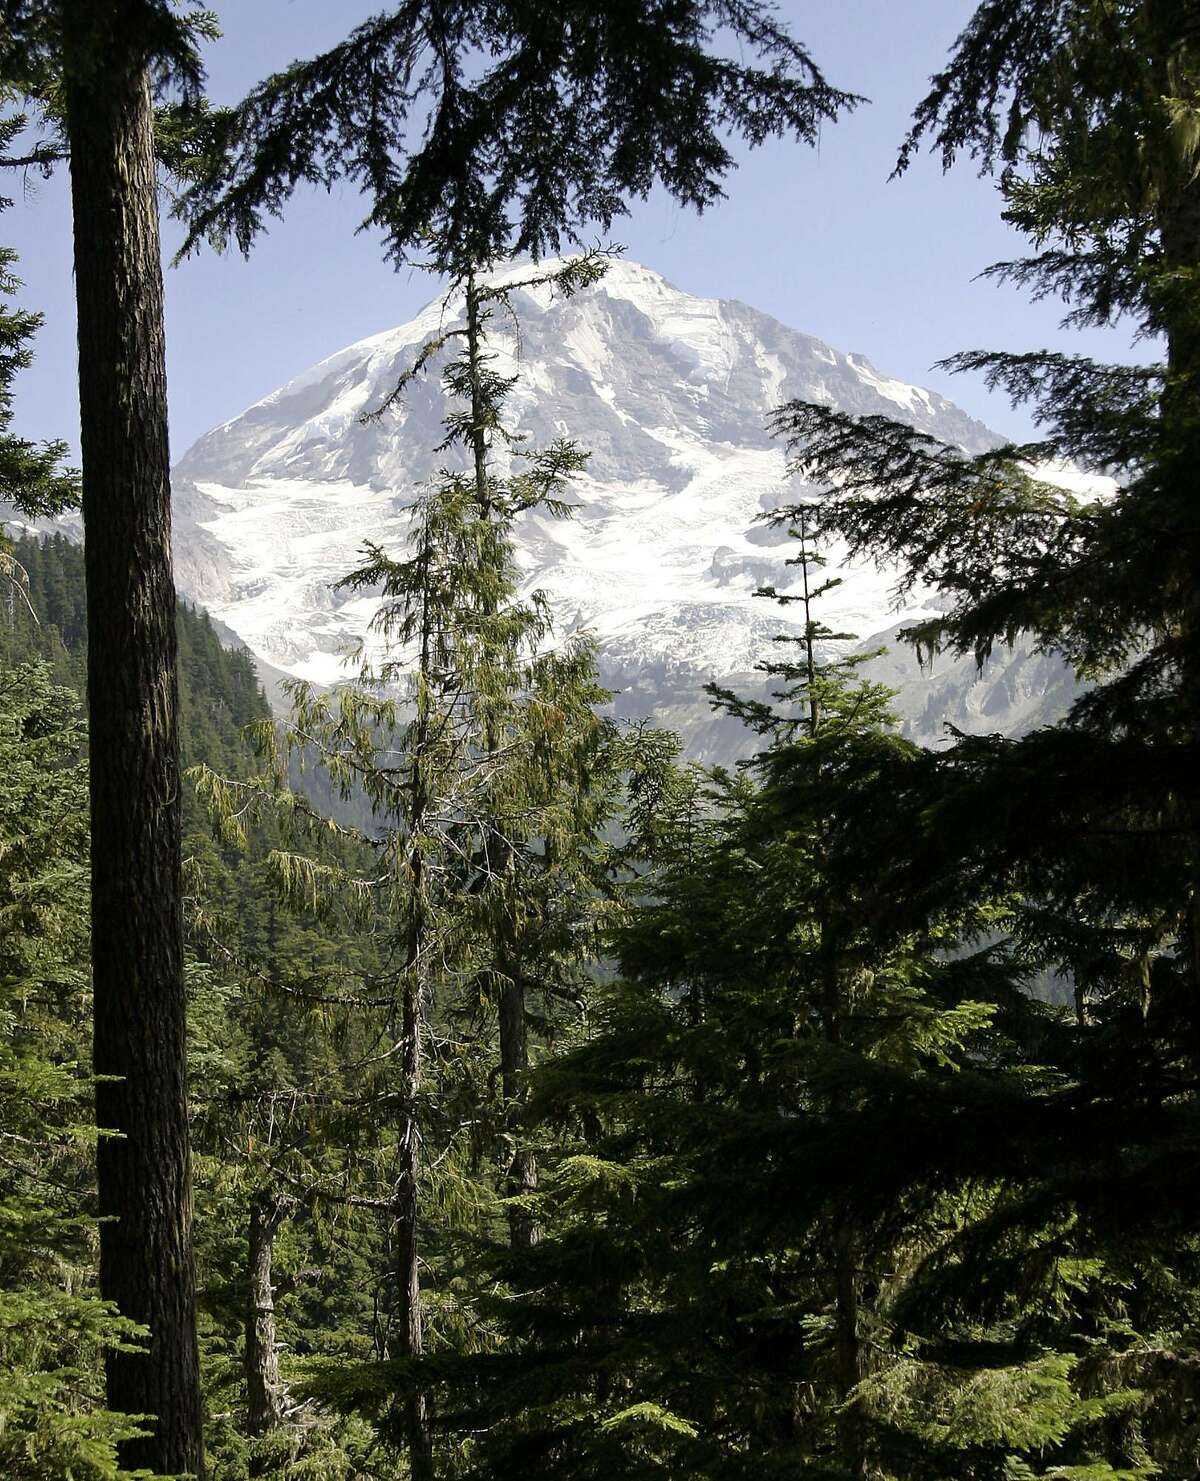 Mt. Rainier is seen from the Wonderland Trail near Mowich Lake in Mt. Rainier National Park, Wash ., Aug. 4, 2003. The 93 mile trail that encircles the mountain, established in 1915, traverses a seemingly endless series of ridges and valleys that radiate from the summit. (AP Photo/John Froschauer)